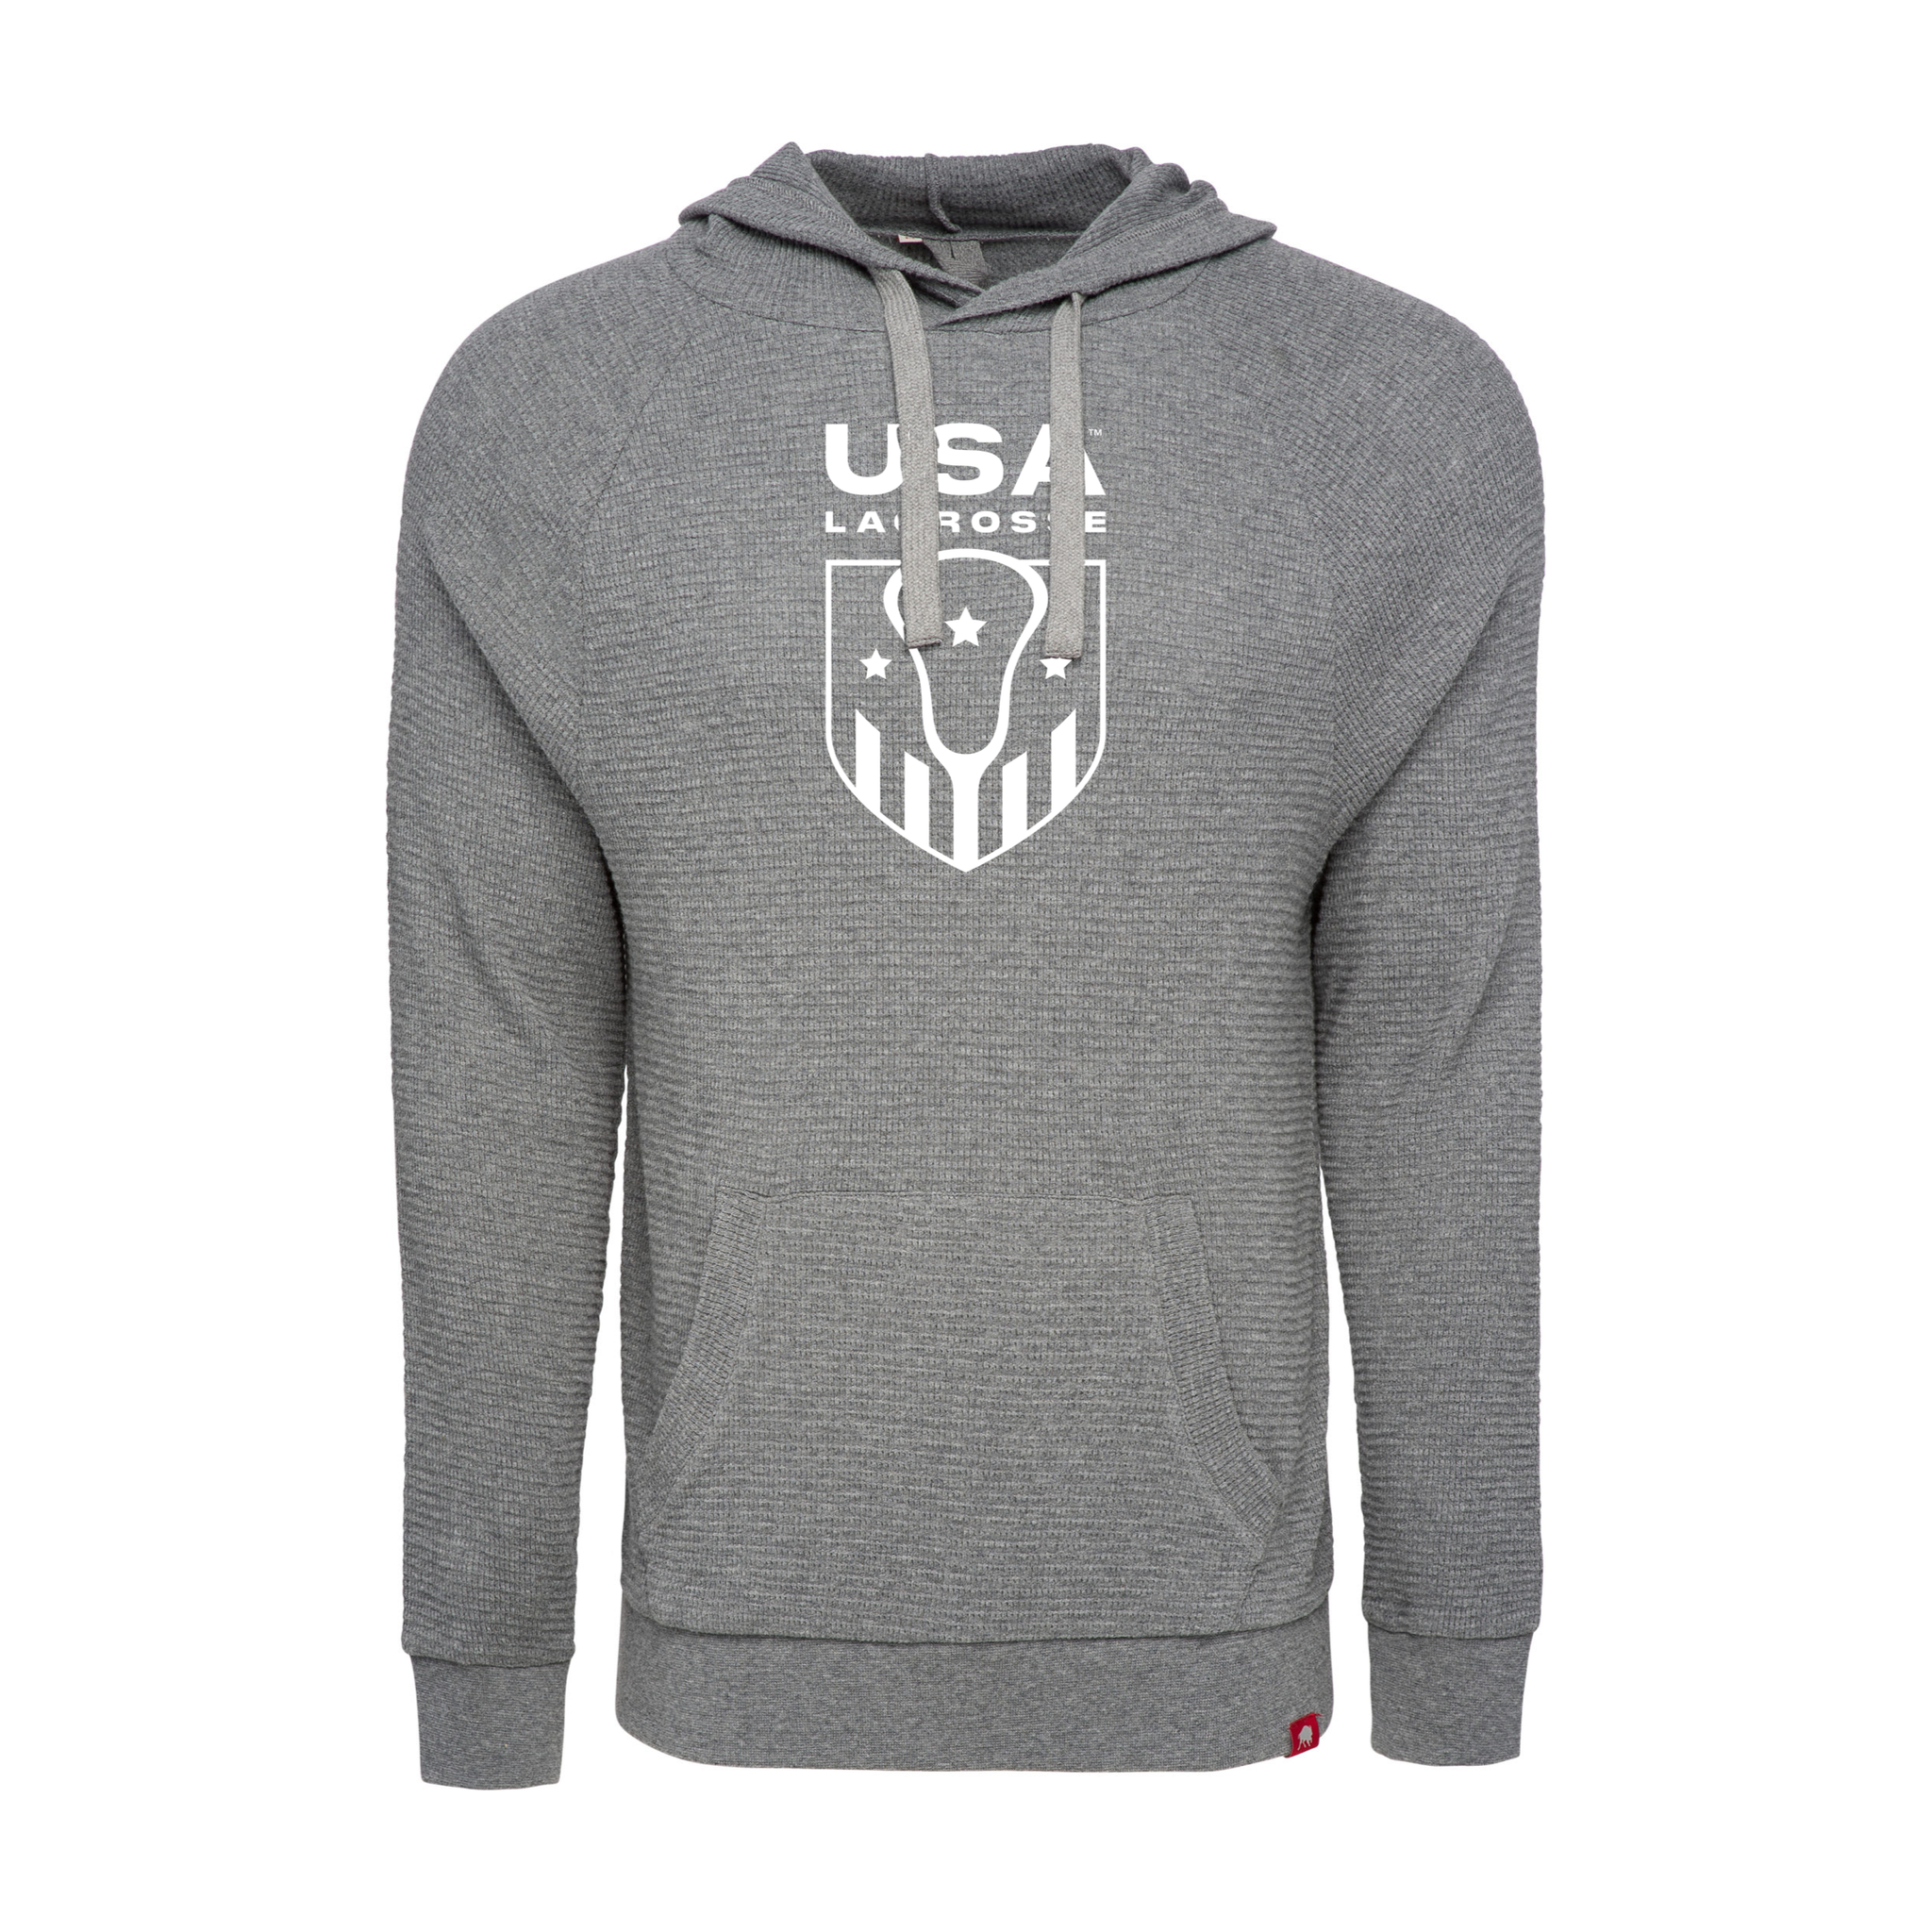 Adult's USA Lacrosse Sportiqe Waffle Knit Pullover Hoodie*